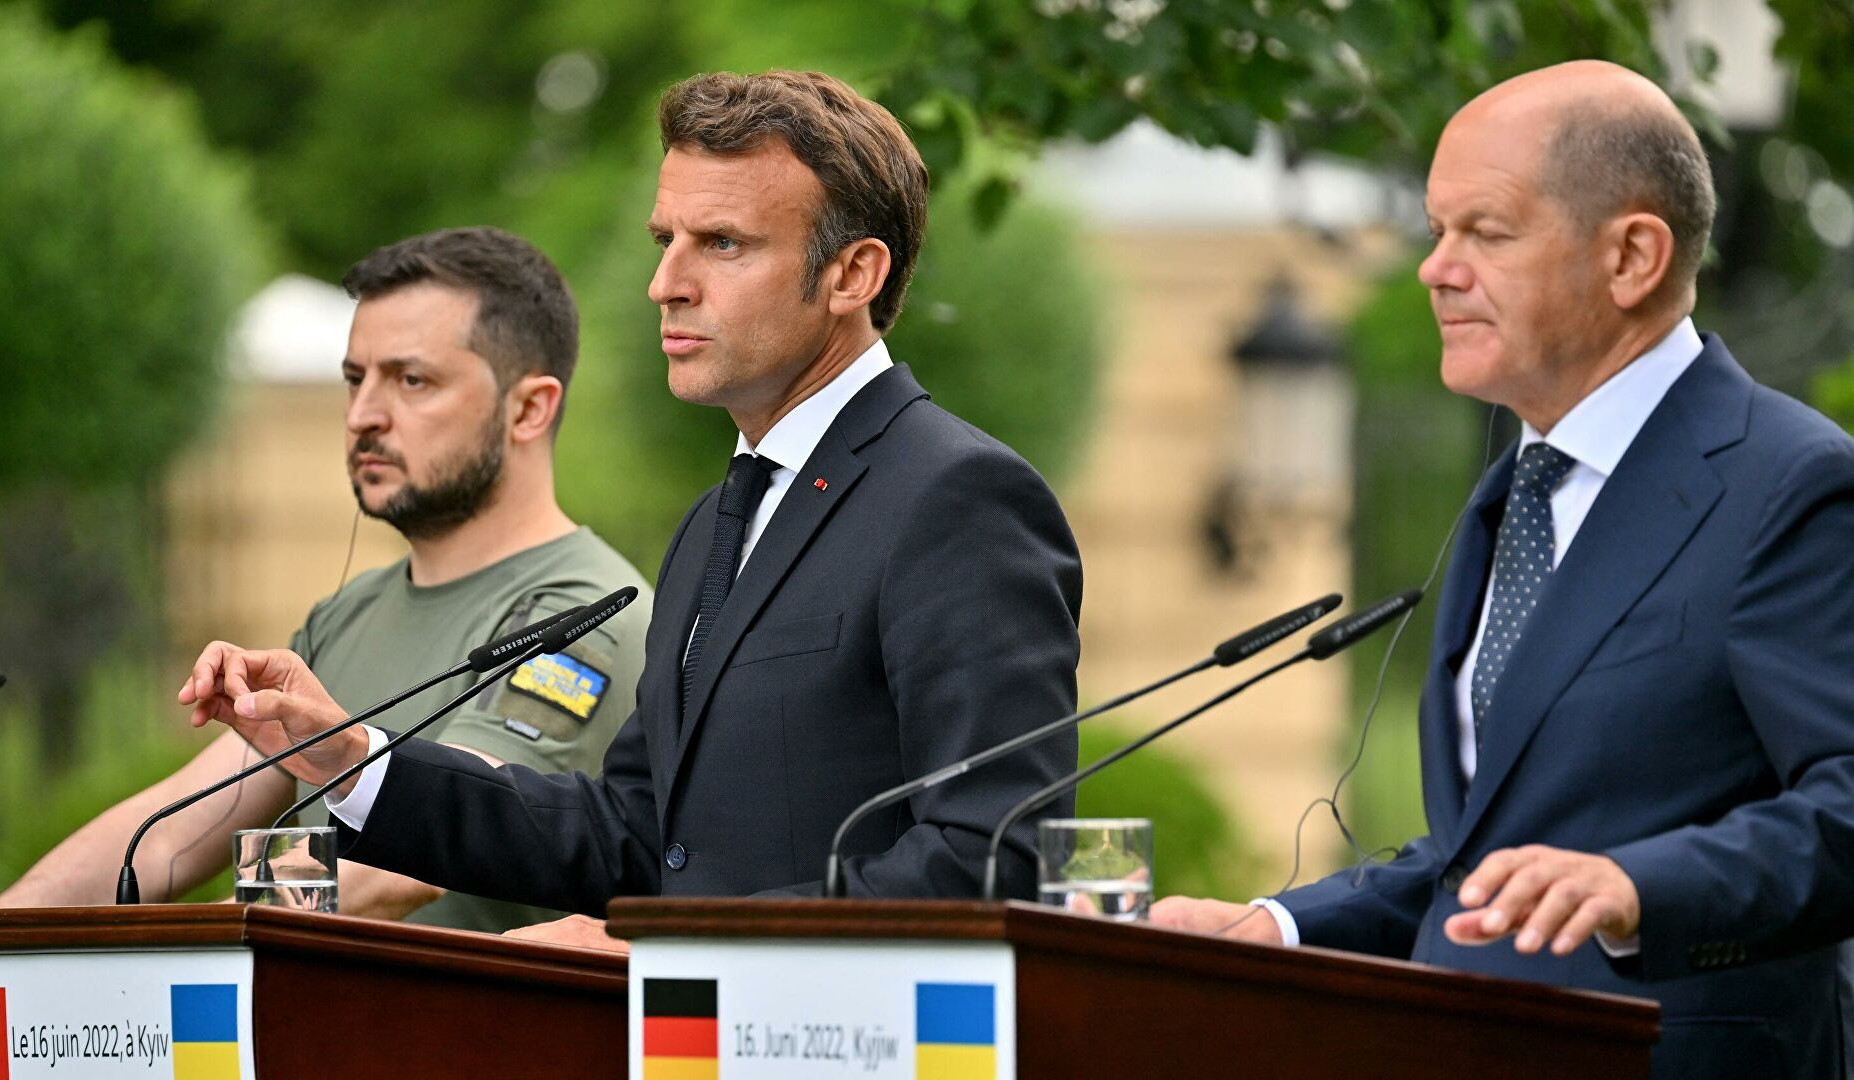 United States said Macron and Scholz refused to comply with Zelensky's request